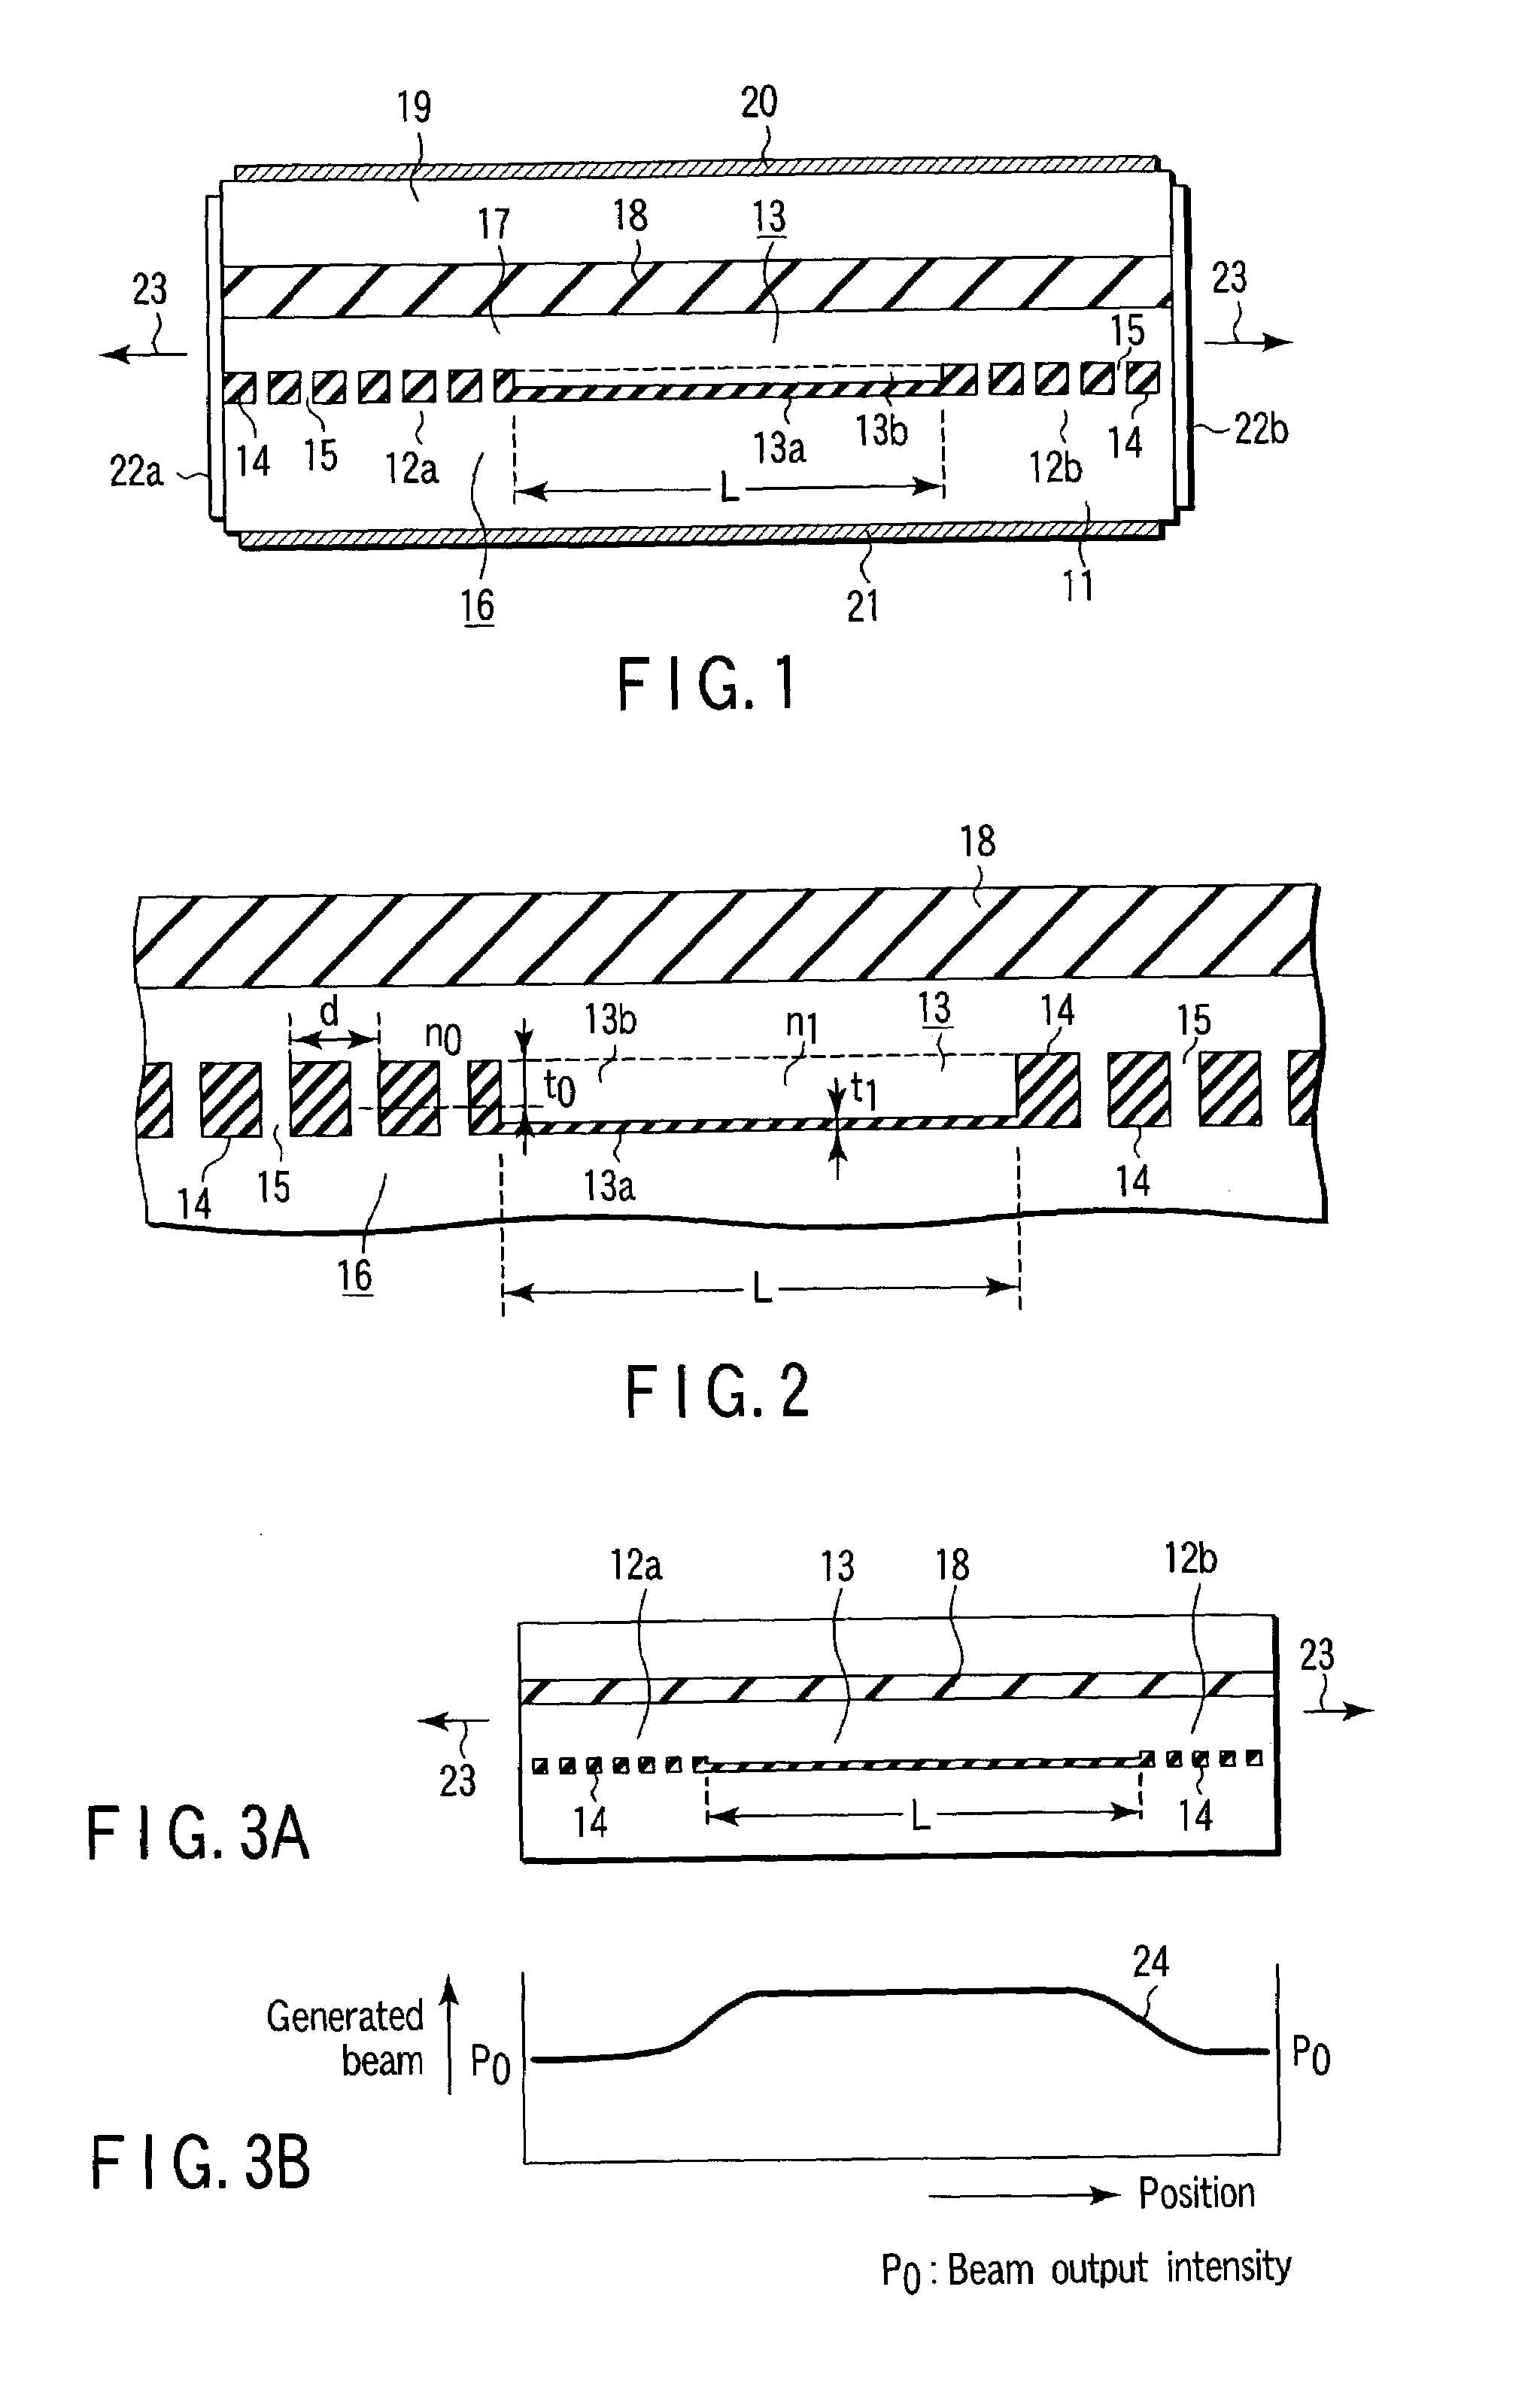 Distributed feedback semiconductor laser for outputting beam of single wavelength